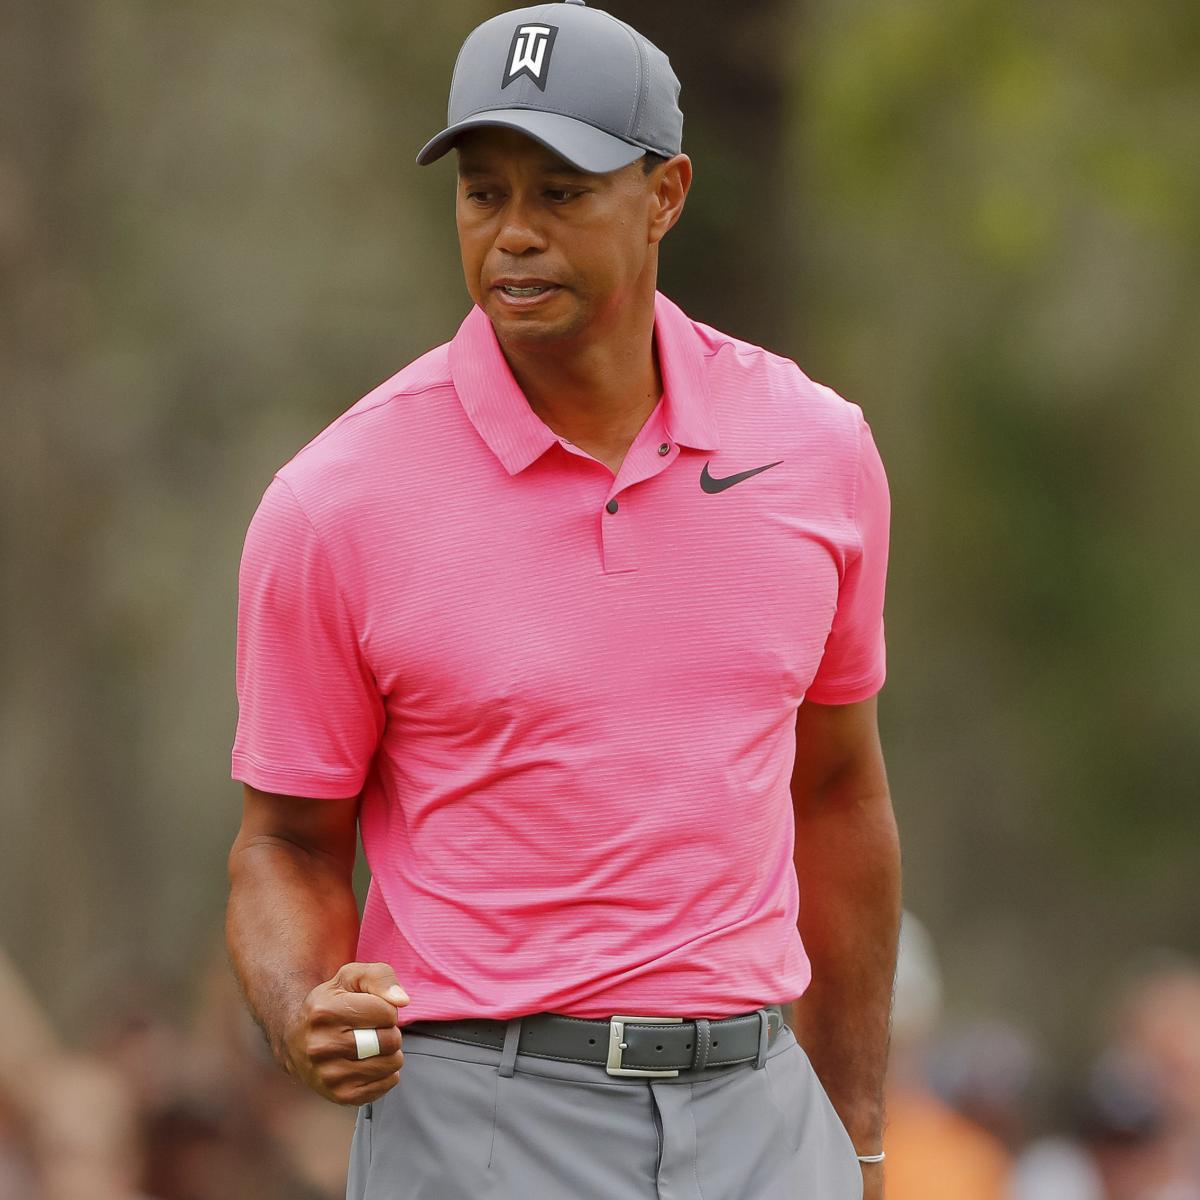 Tiger Woods Masters Odds Now Shorter Than Spieth, Rahm, and Garcia